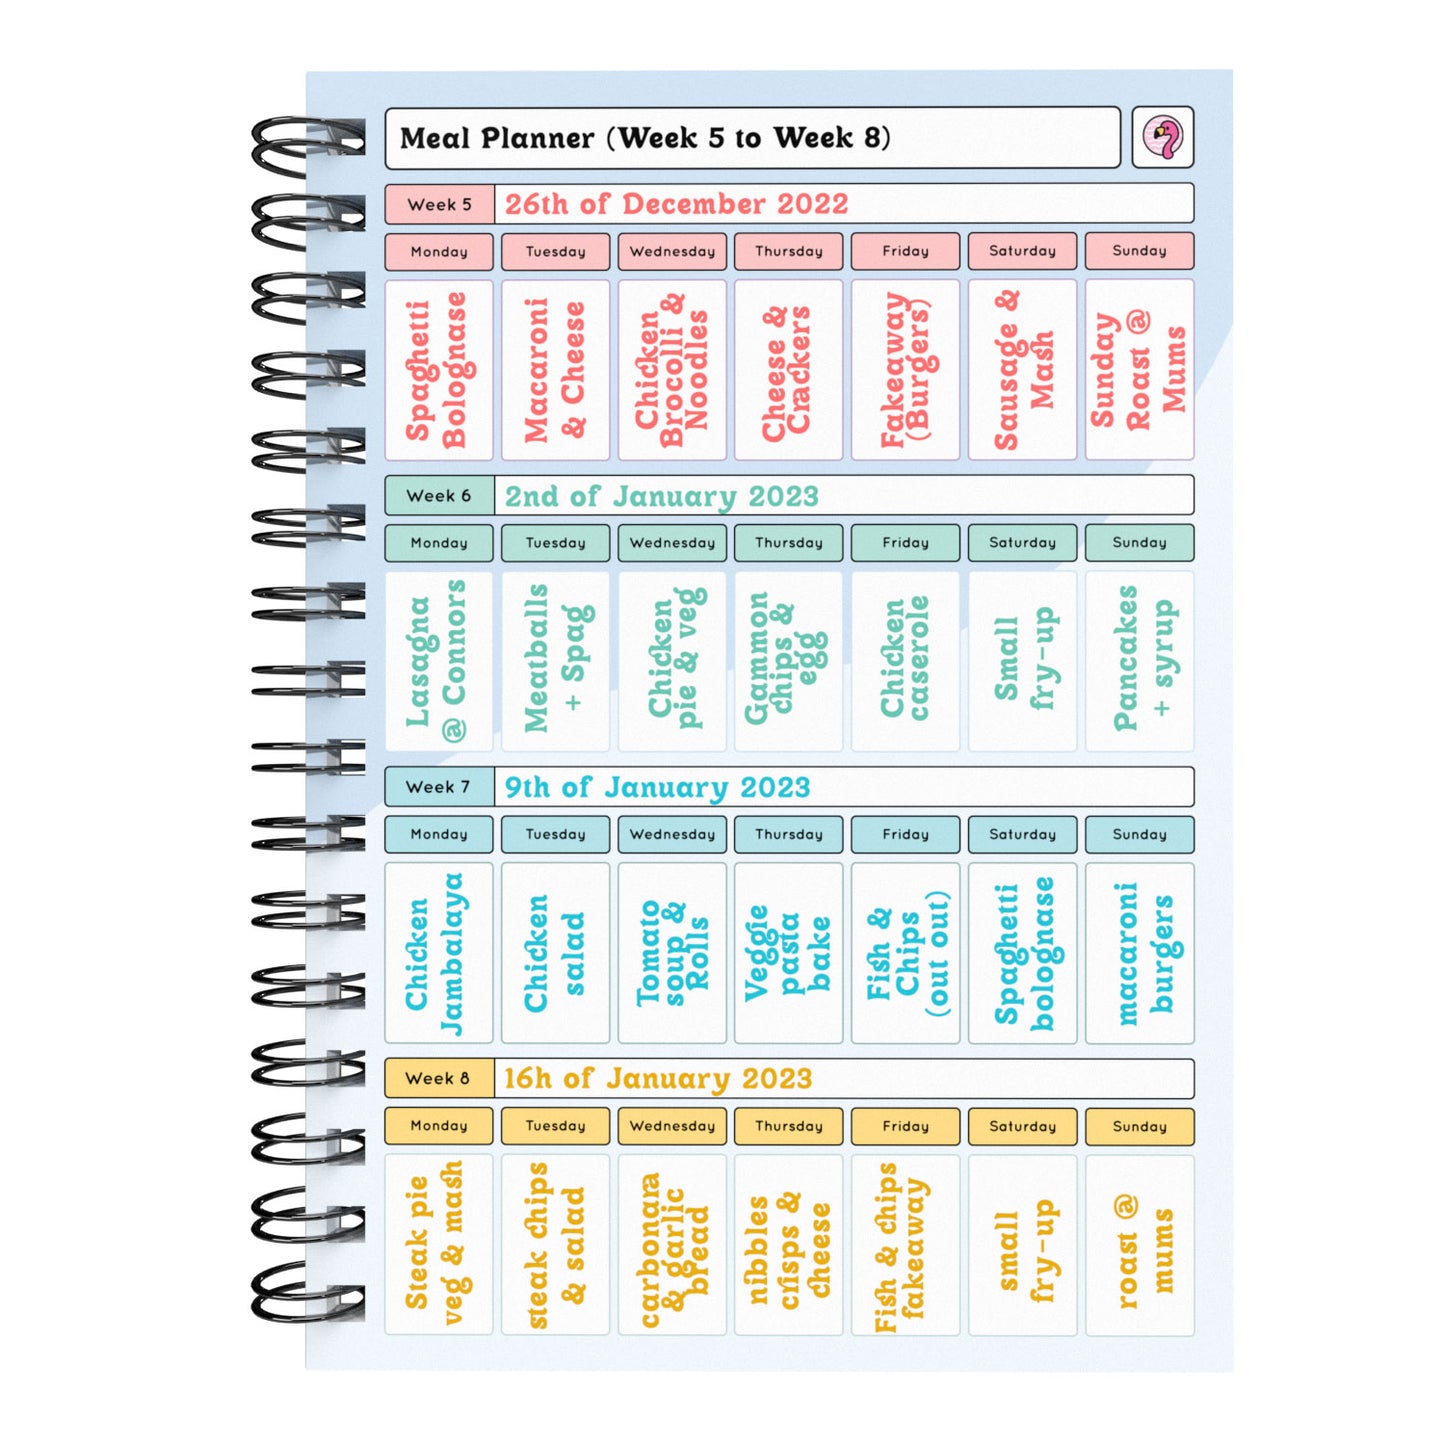 Food Diary - C34 - Calorie Counting